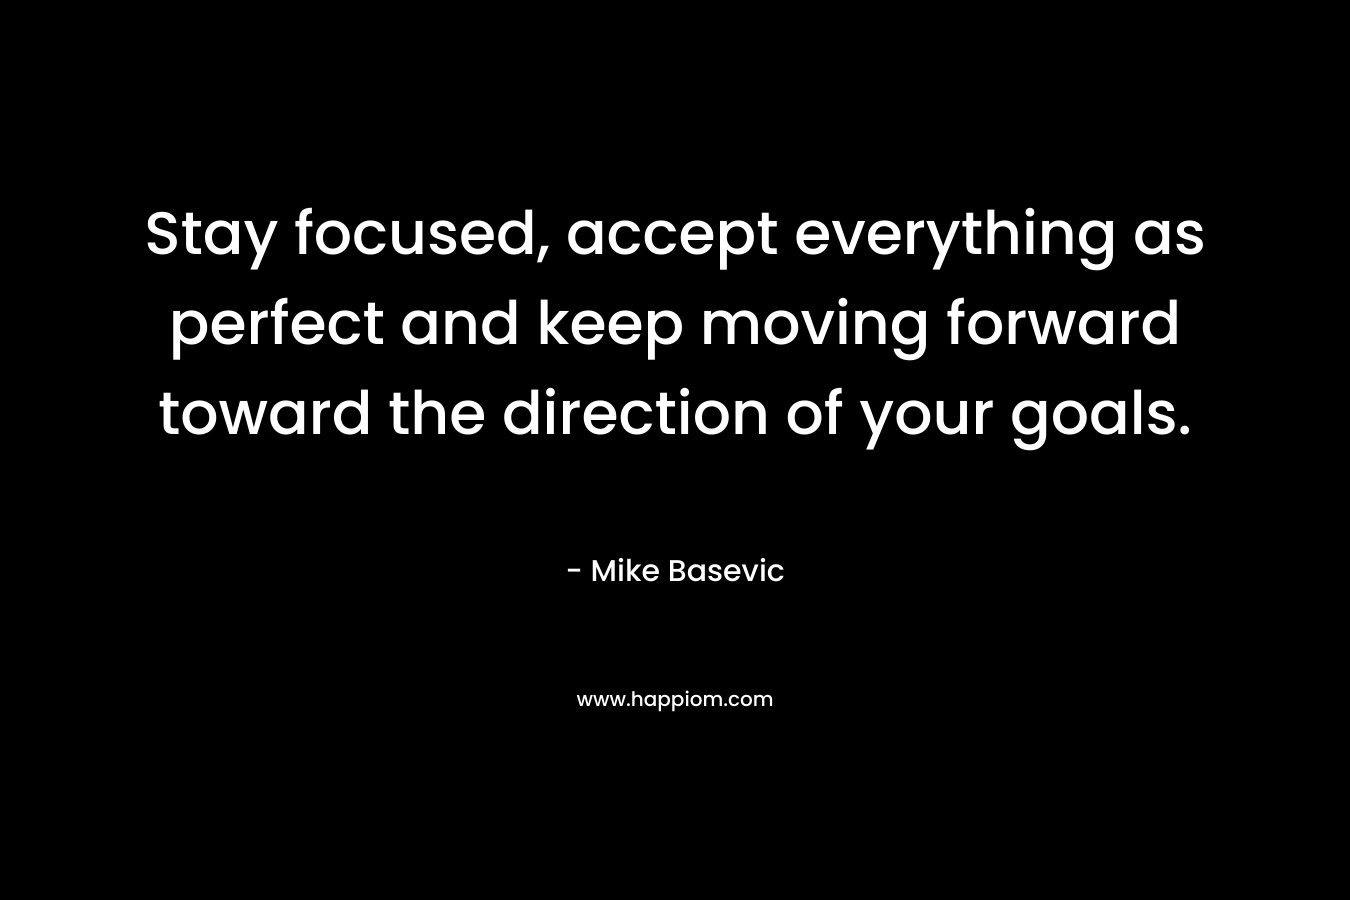 Stay focused, accept everything as perfect and keep moving forward toward the direction of your goals.